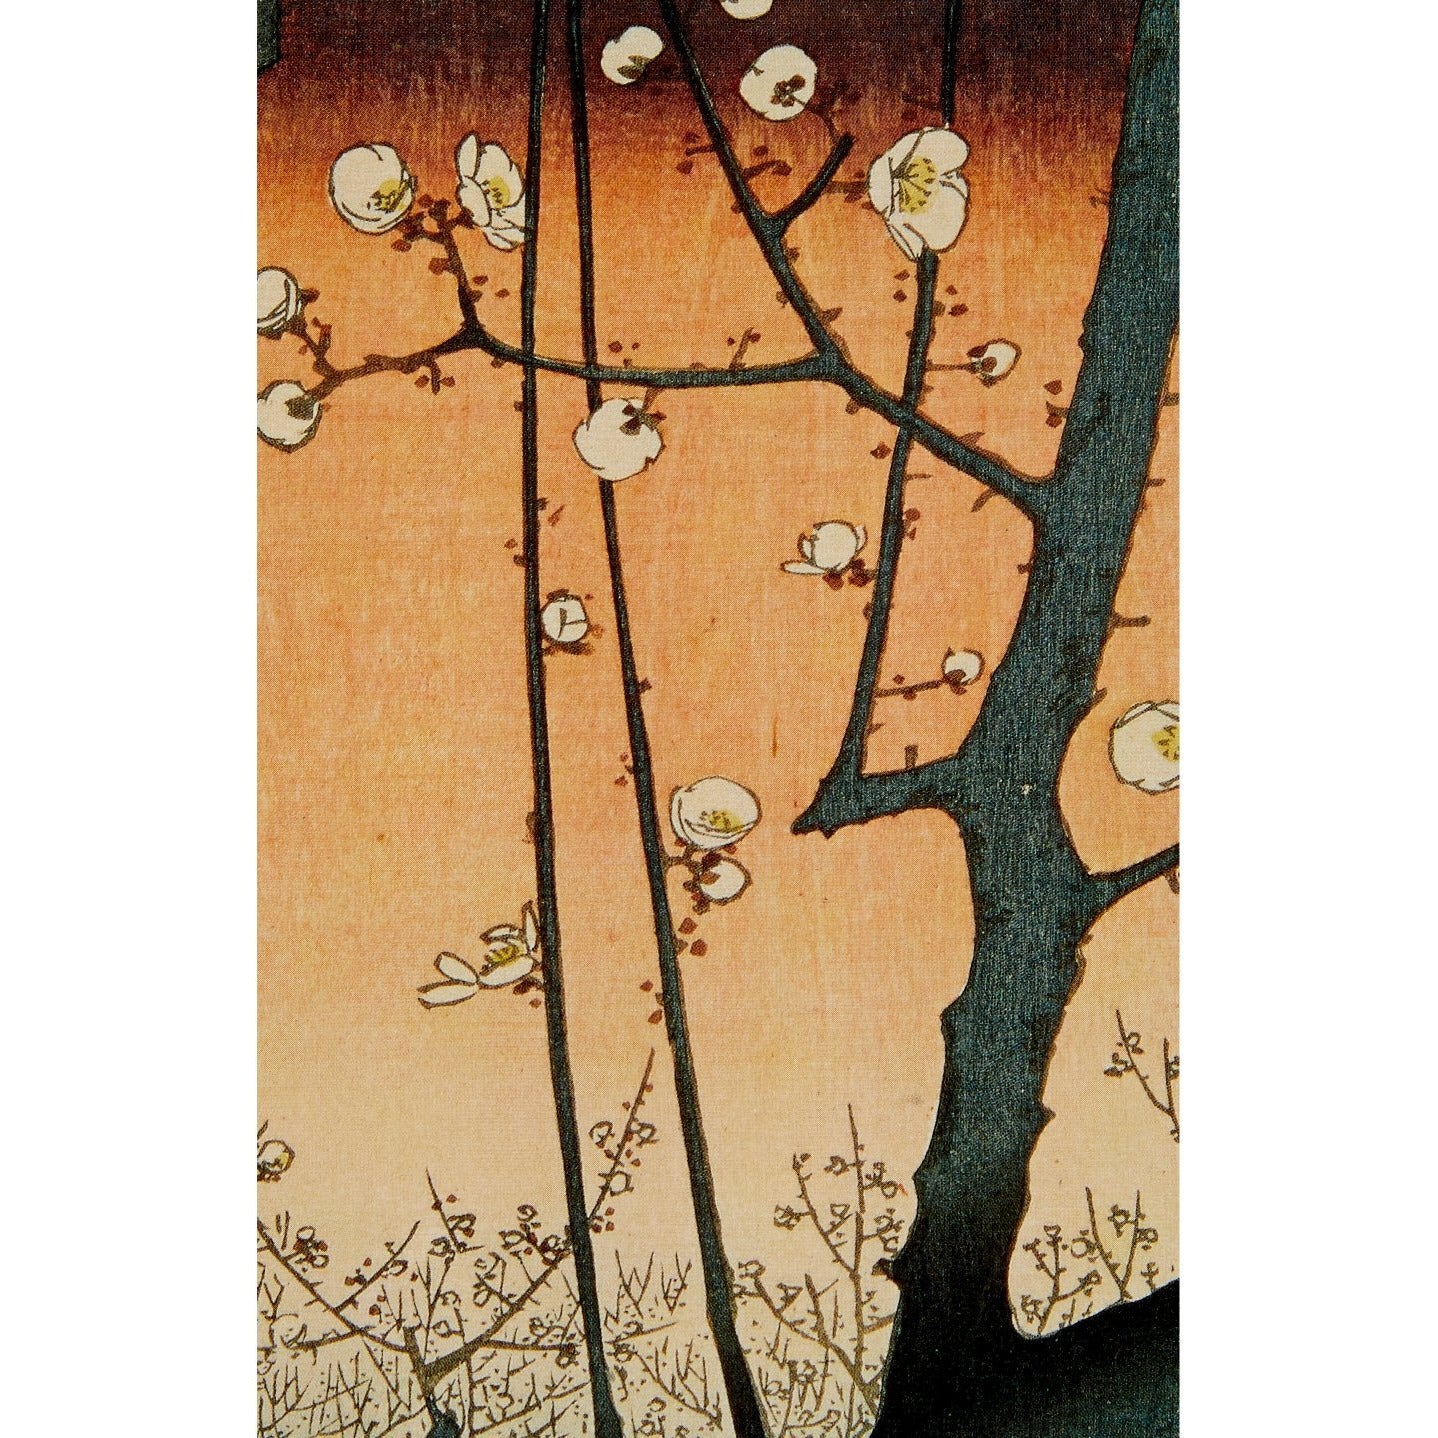 Notecard - detail from Plum Estate at Kameido by Hiroshige. From the collection of the Fitzwilliam Museum, brought to you by CuratingCambridge.co.uk